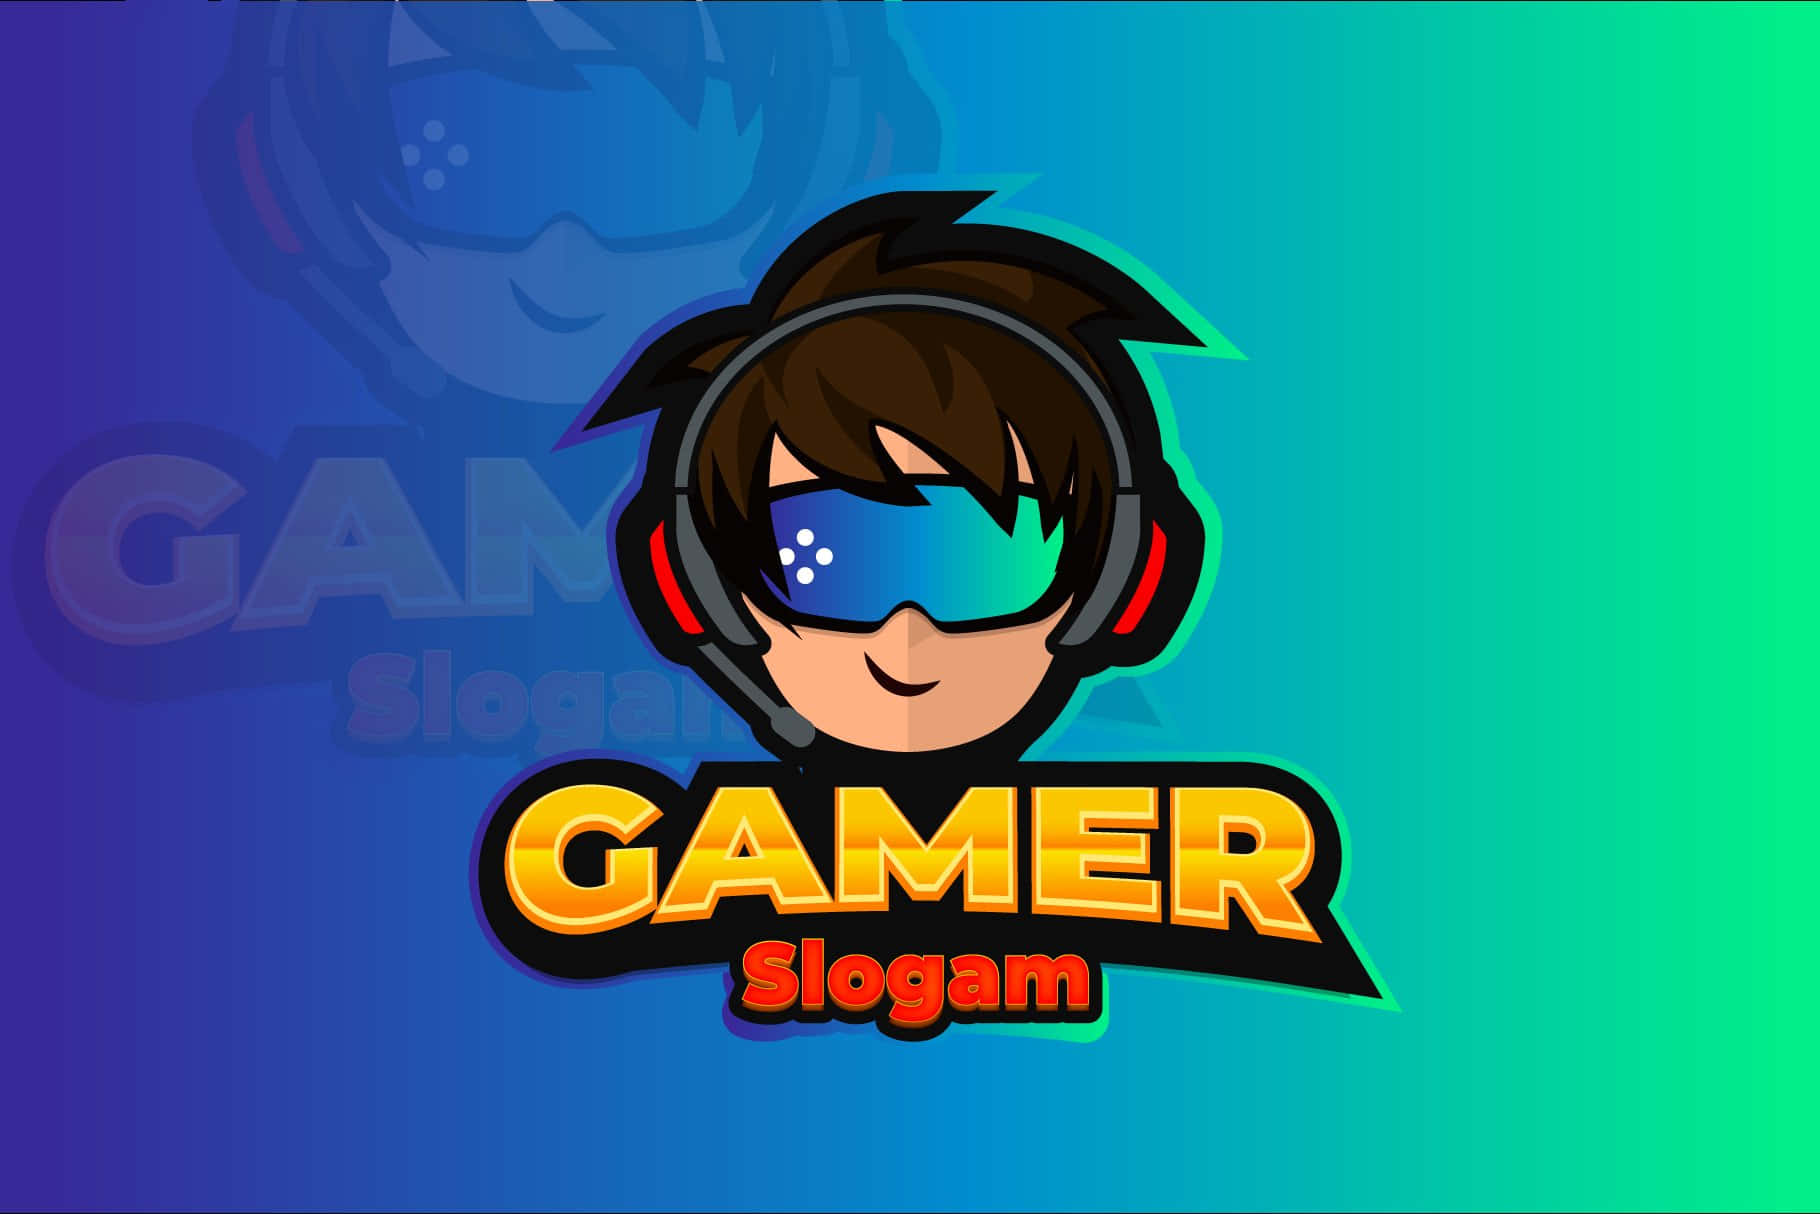 Gaming Siogam Profile pictures